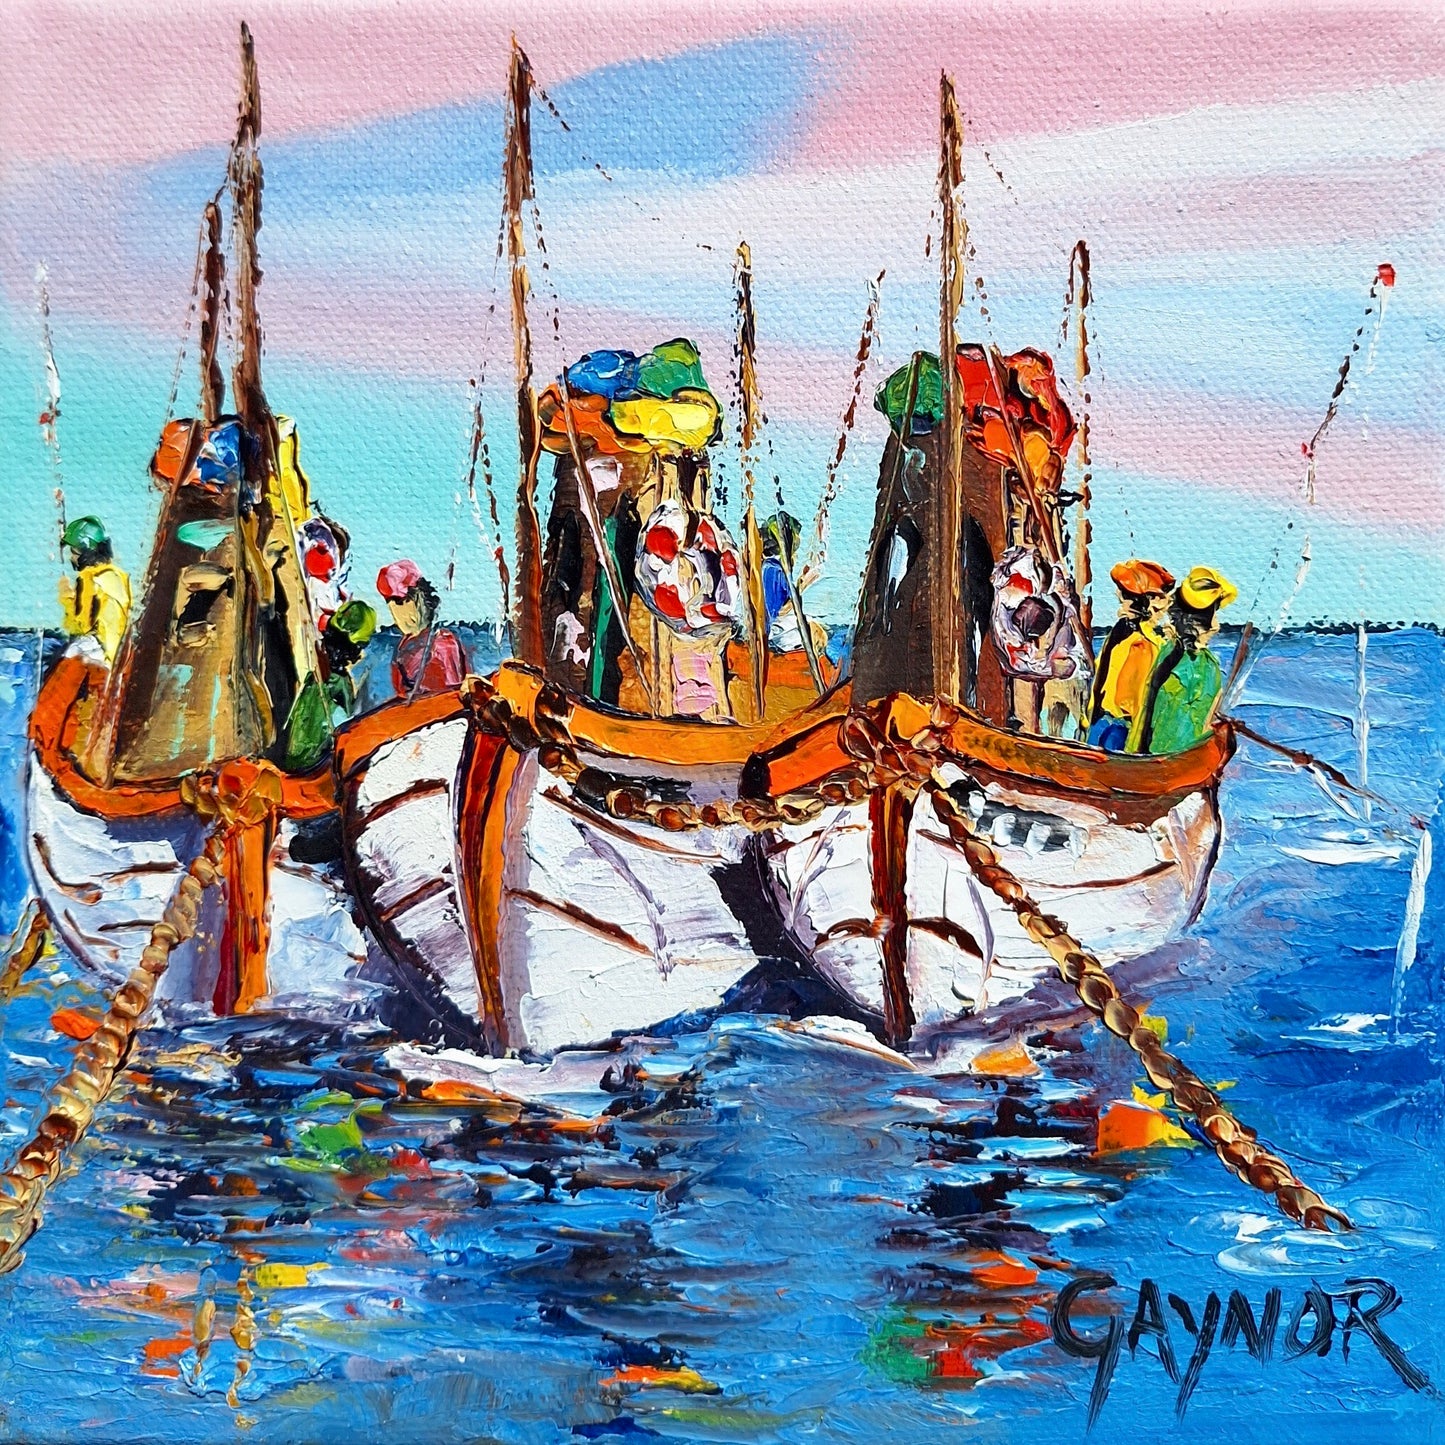 Gaynor - Oil on Stretched Canvas